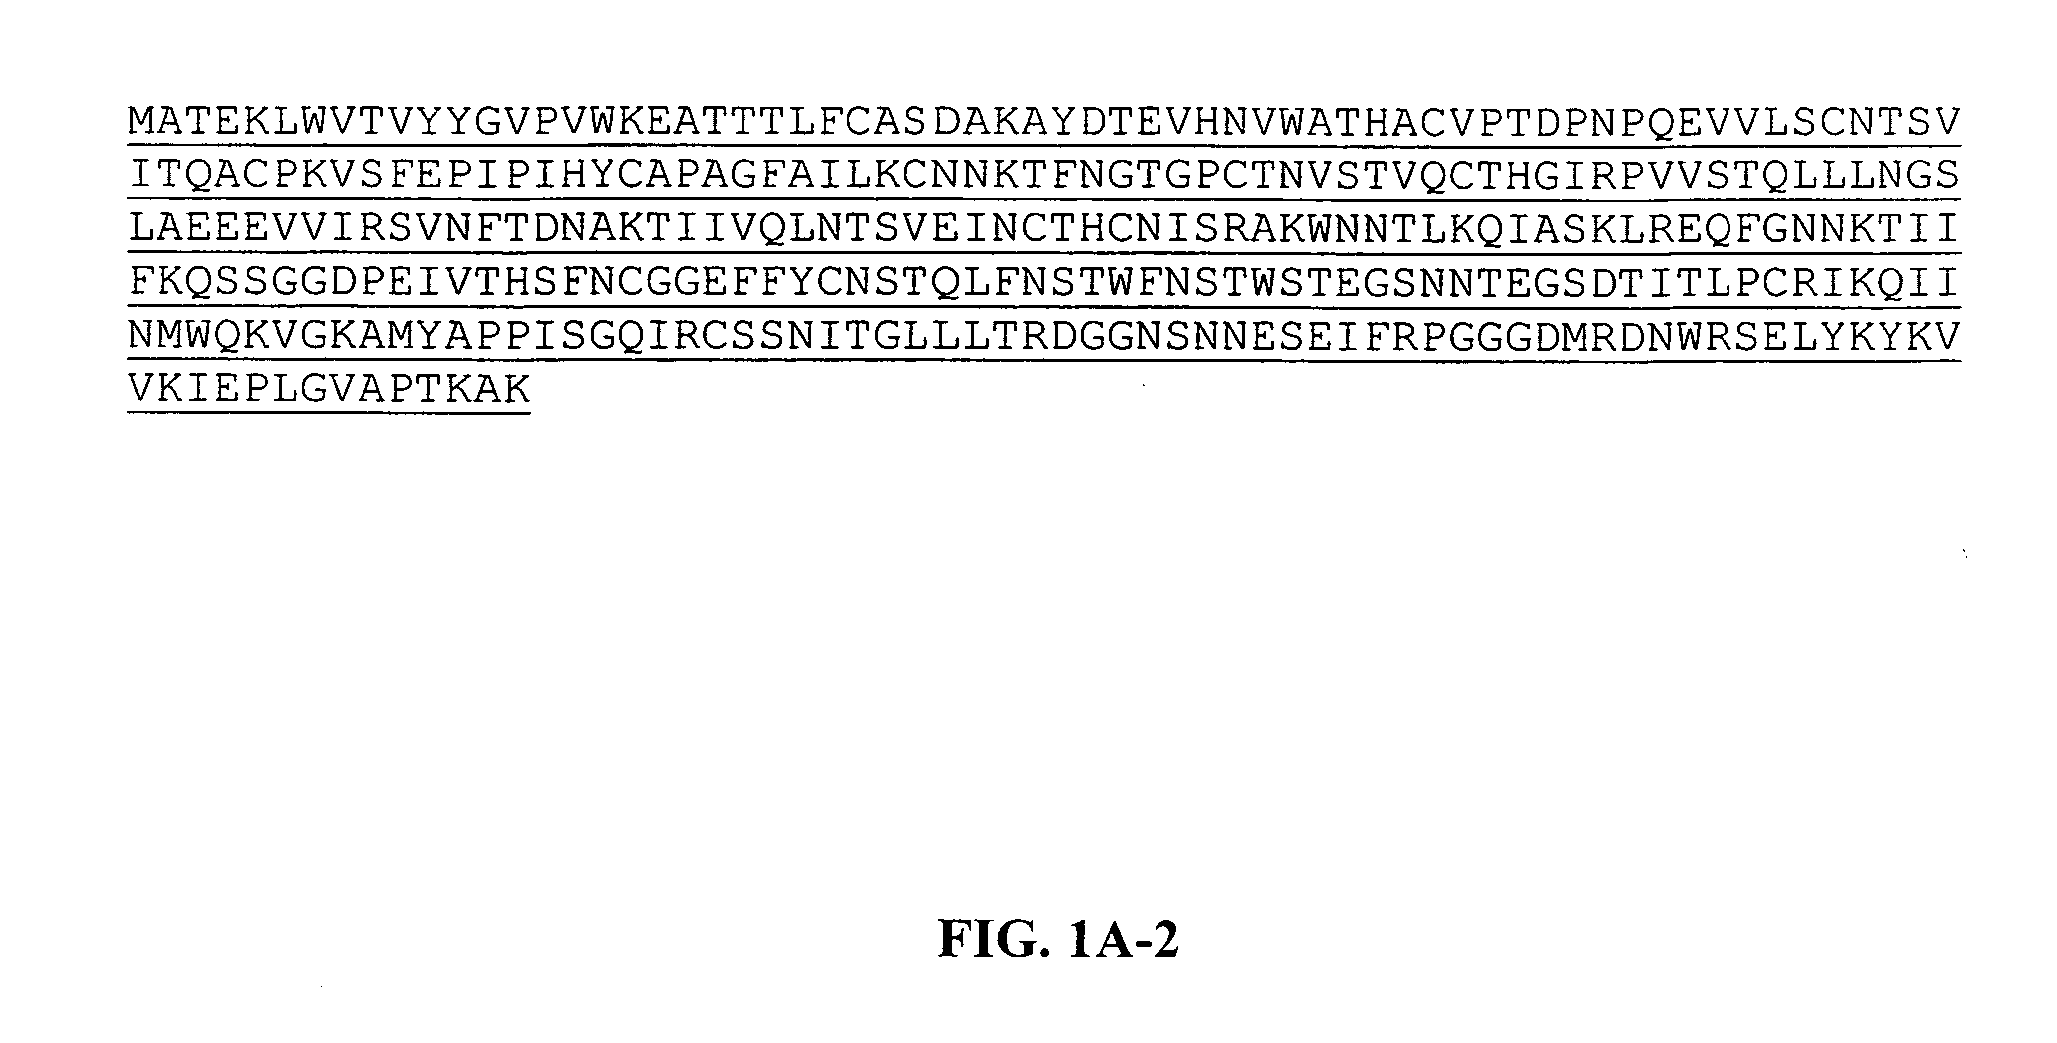 Method for producing catalytic antibodies (variants), antigens for immunization and nucleotide sequence